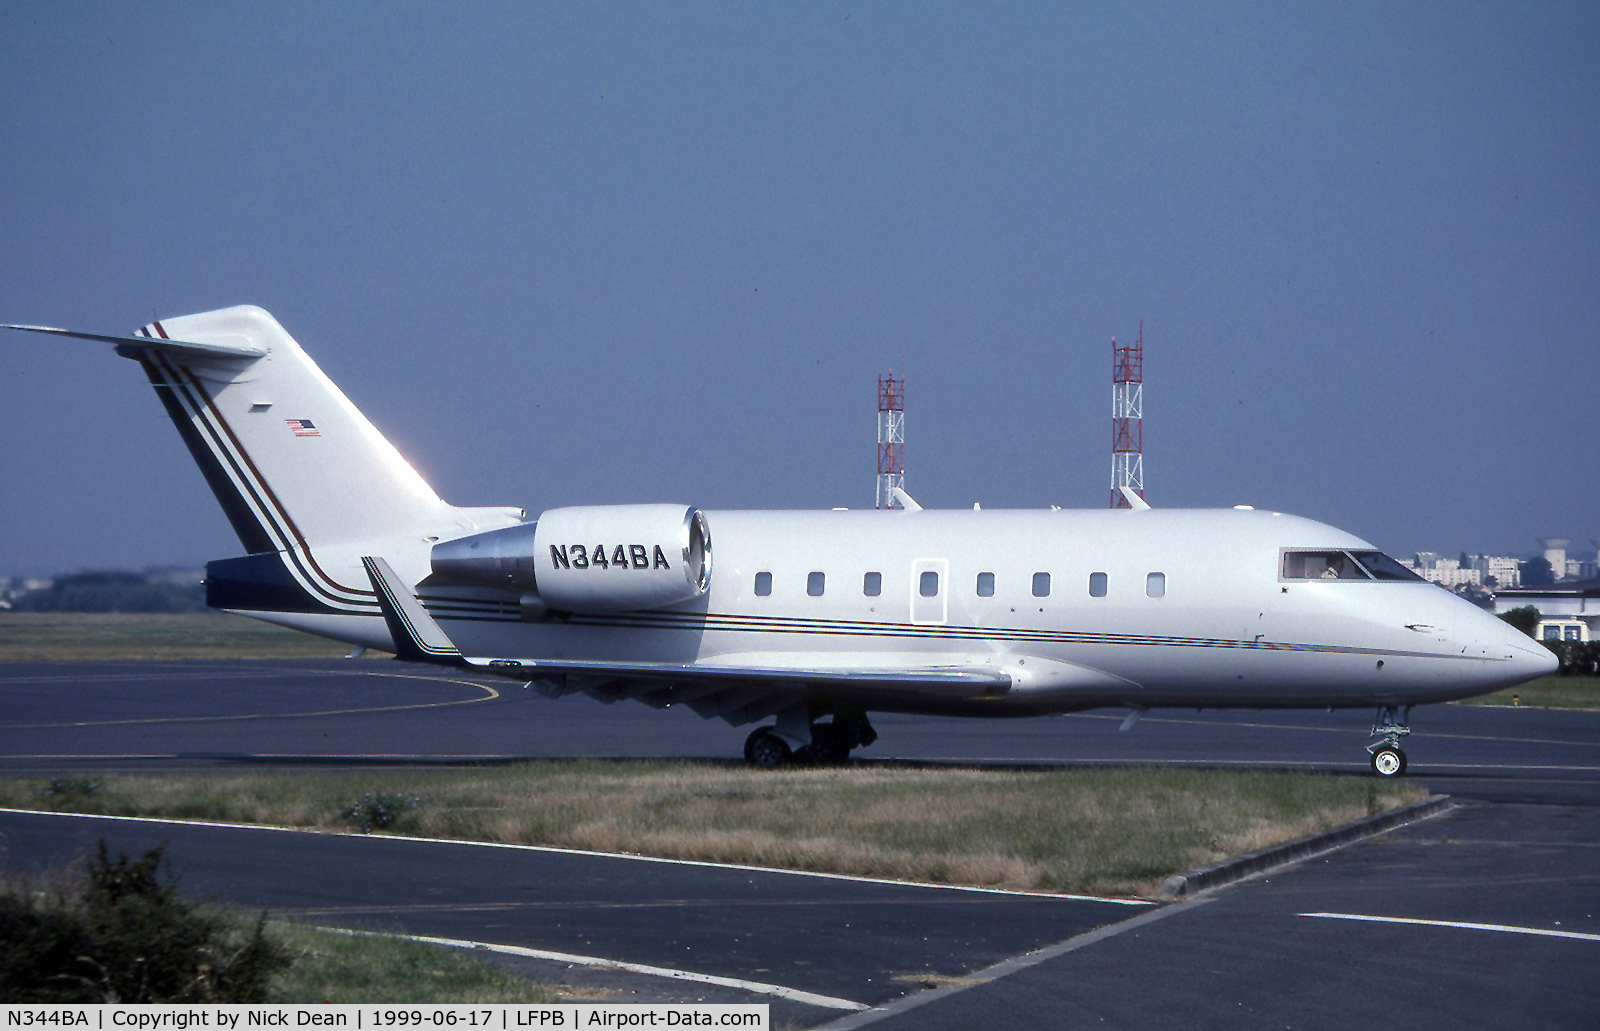 N344BA, 1997 Canadair Challenger 604 (CL-600-2B16) C/N 5344, LFPB (Currently registered N604DH as posted)